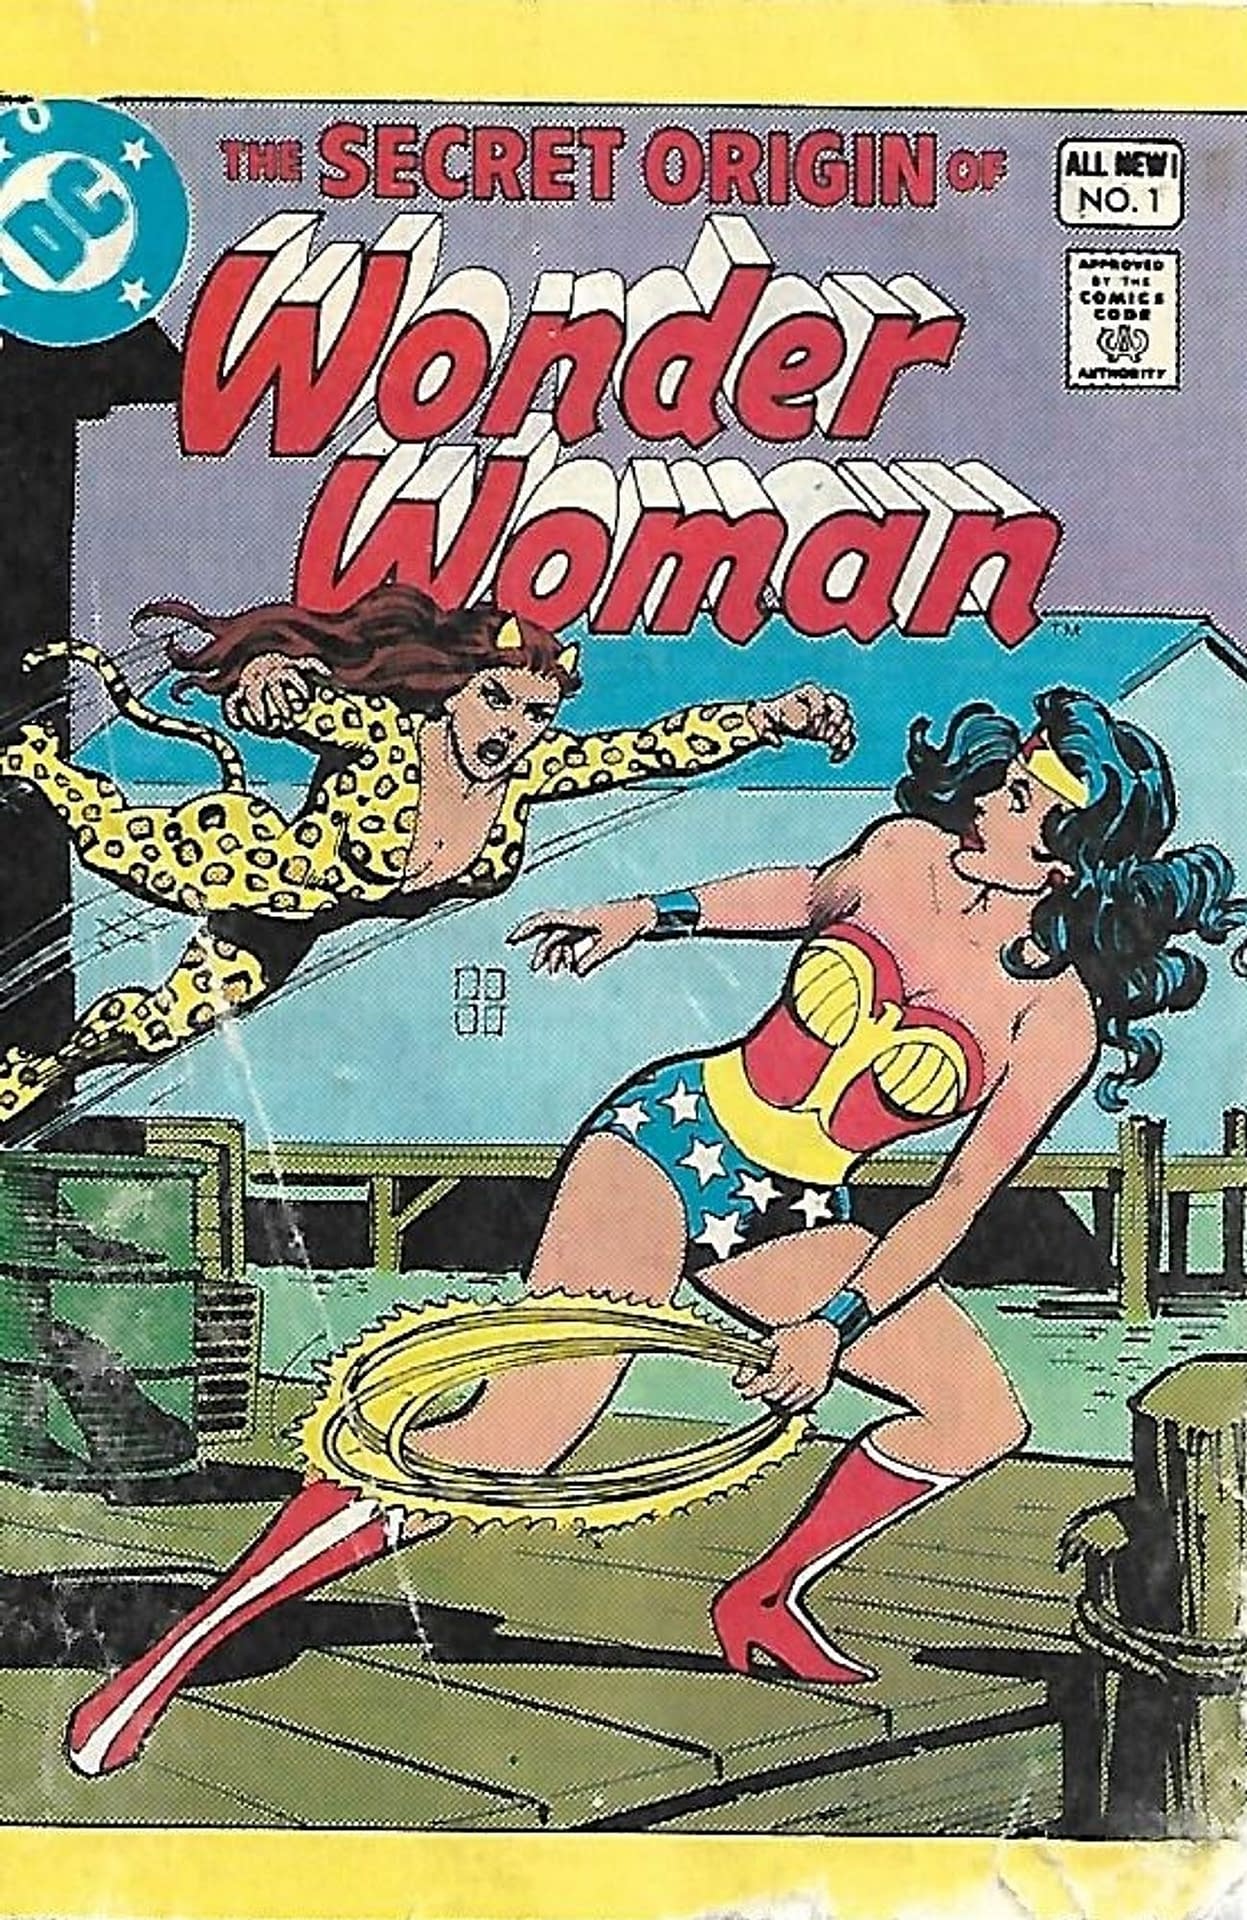 WONDER WOMAN PAGES FROM SUPER HEROES PUNCH-OUT BOOK 1980 VINTAGE REPRINT 